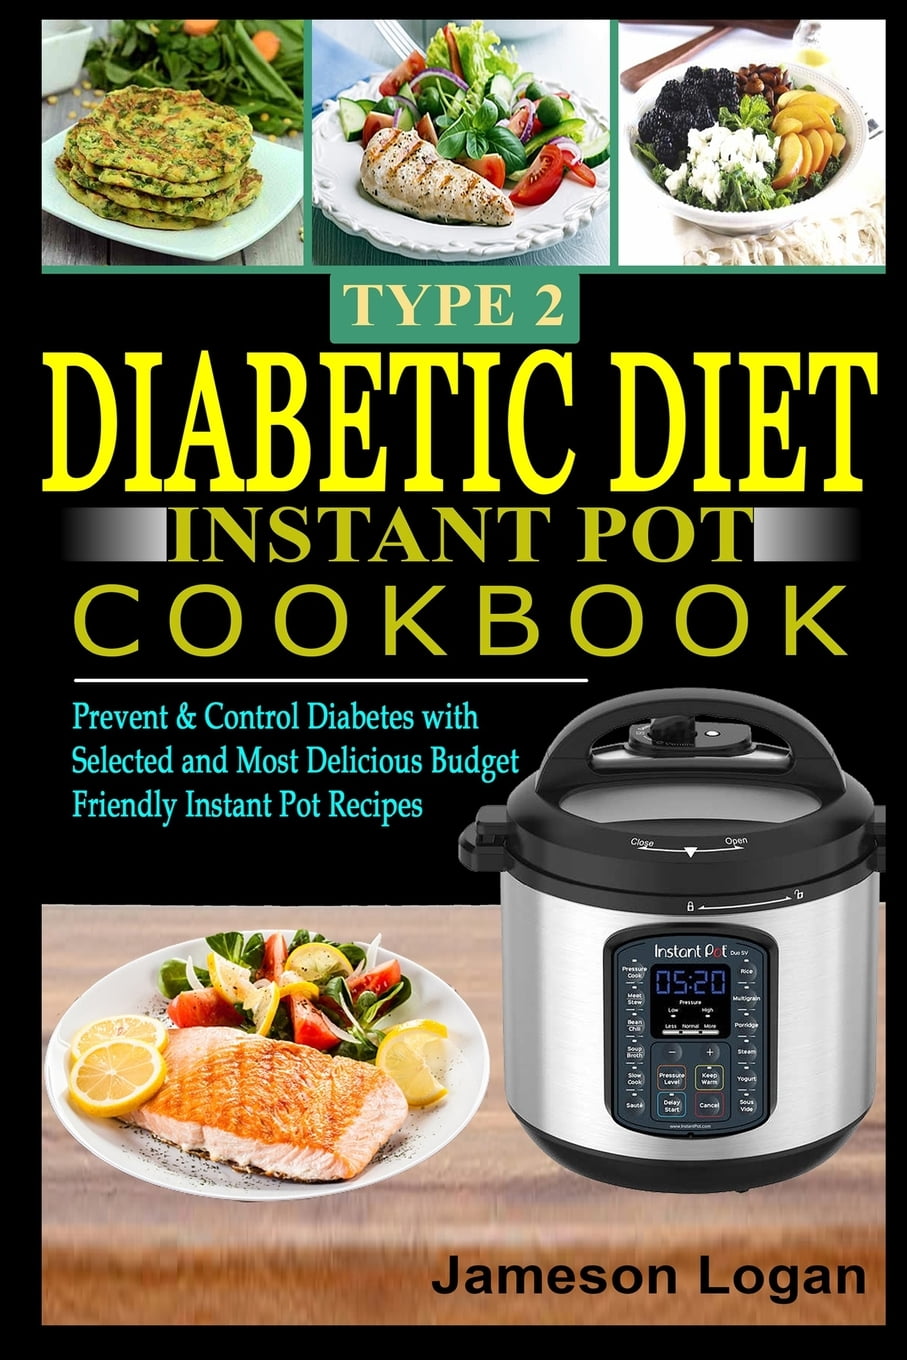 Type 2 Diabetic Diet Instant Pot Cookbook: Prevent & Control Diabetes with Selected and Most ...